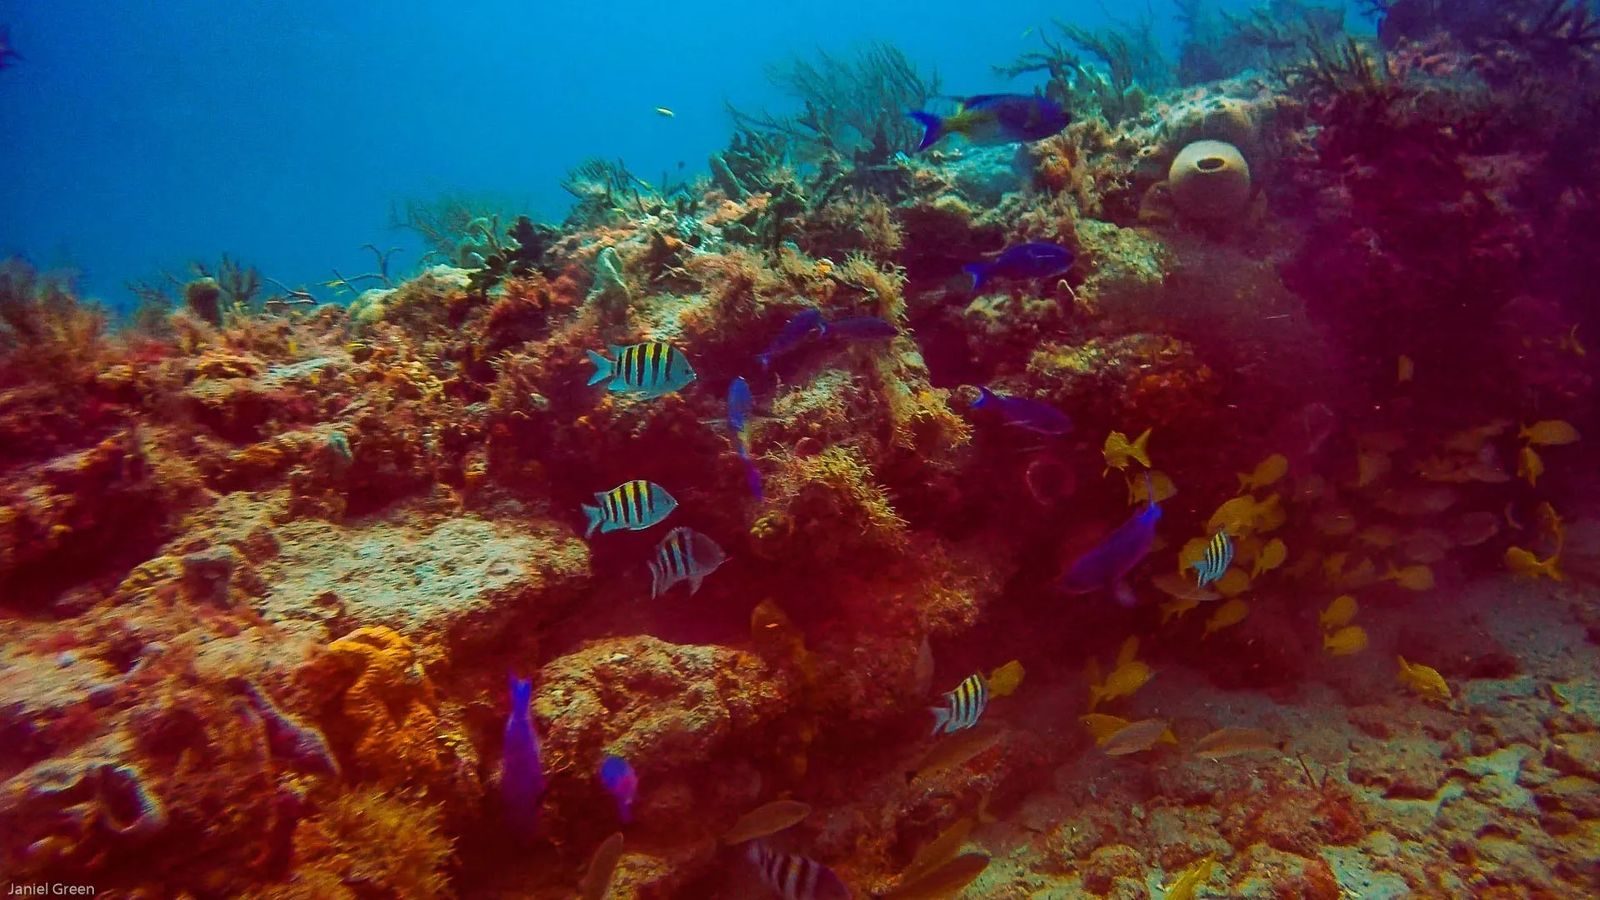 Scuba Diving Singer Island Florida with blue and yellow fish hiding among the coral. 